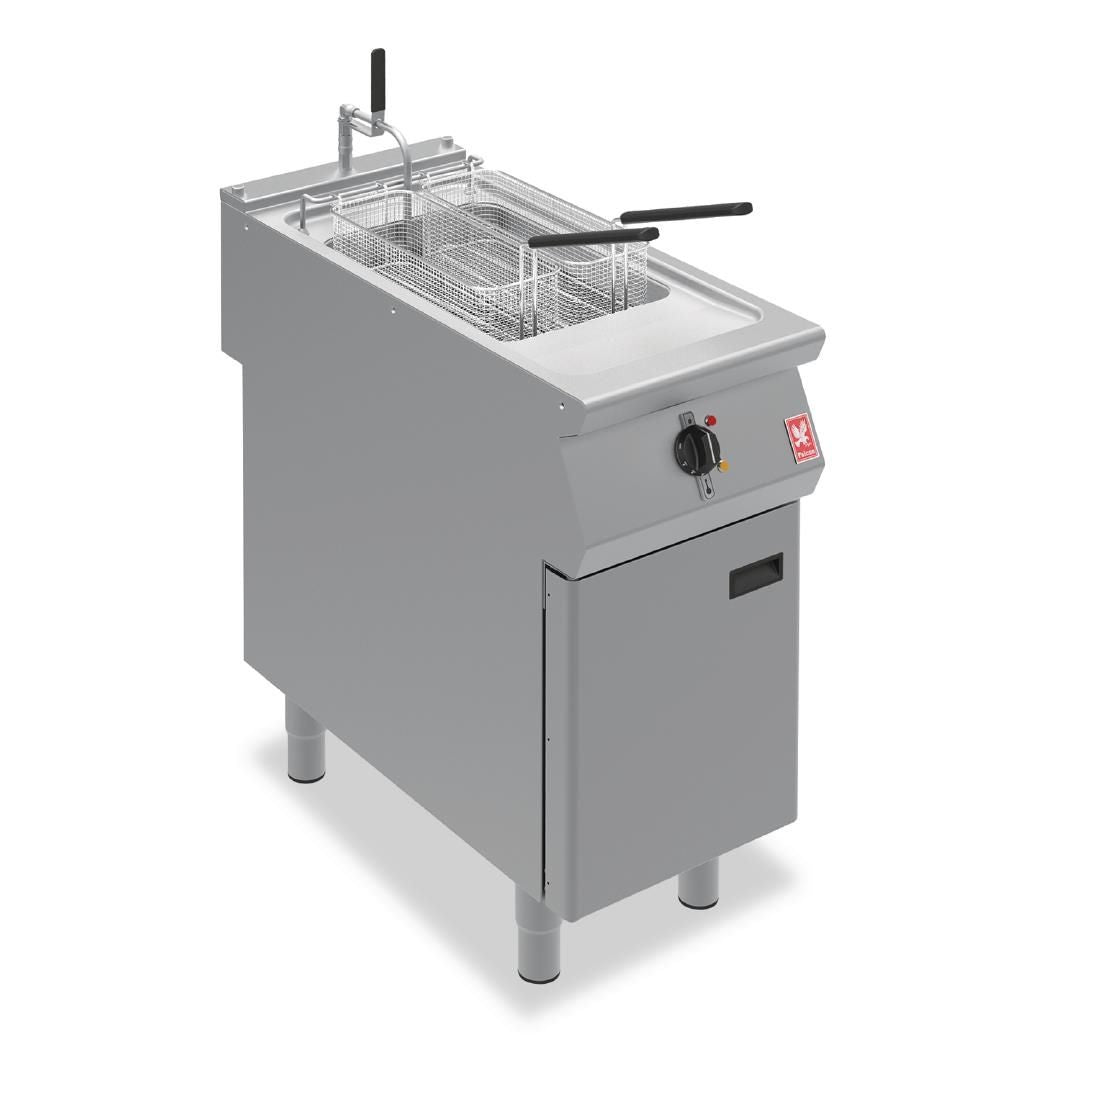 Falcon F900 Single Tank Twin Basket Free Standing Electric Filtration Fryer E9341F JD Catering Equipment Solutions Ltd